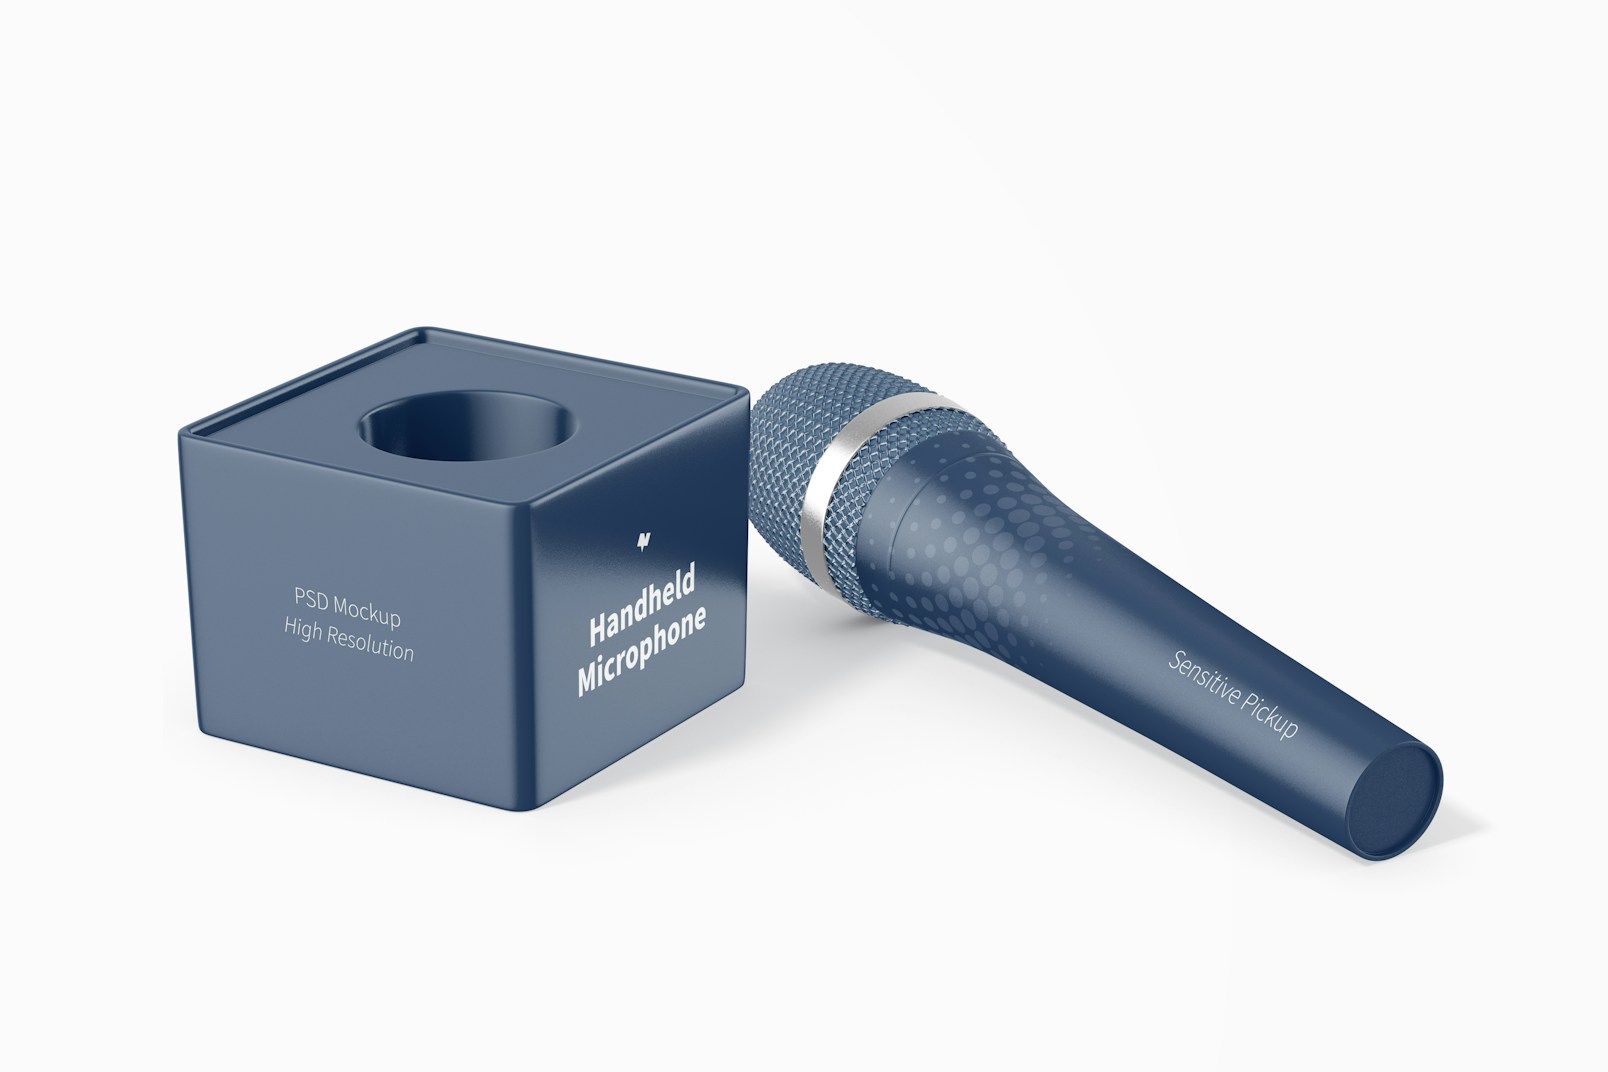 Handheld Microphone with Cube Mockup, Perspective